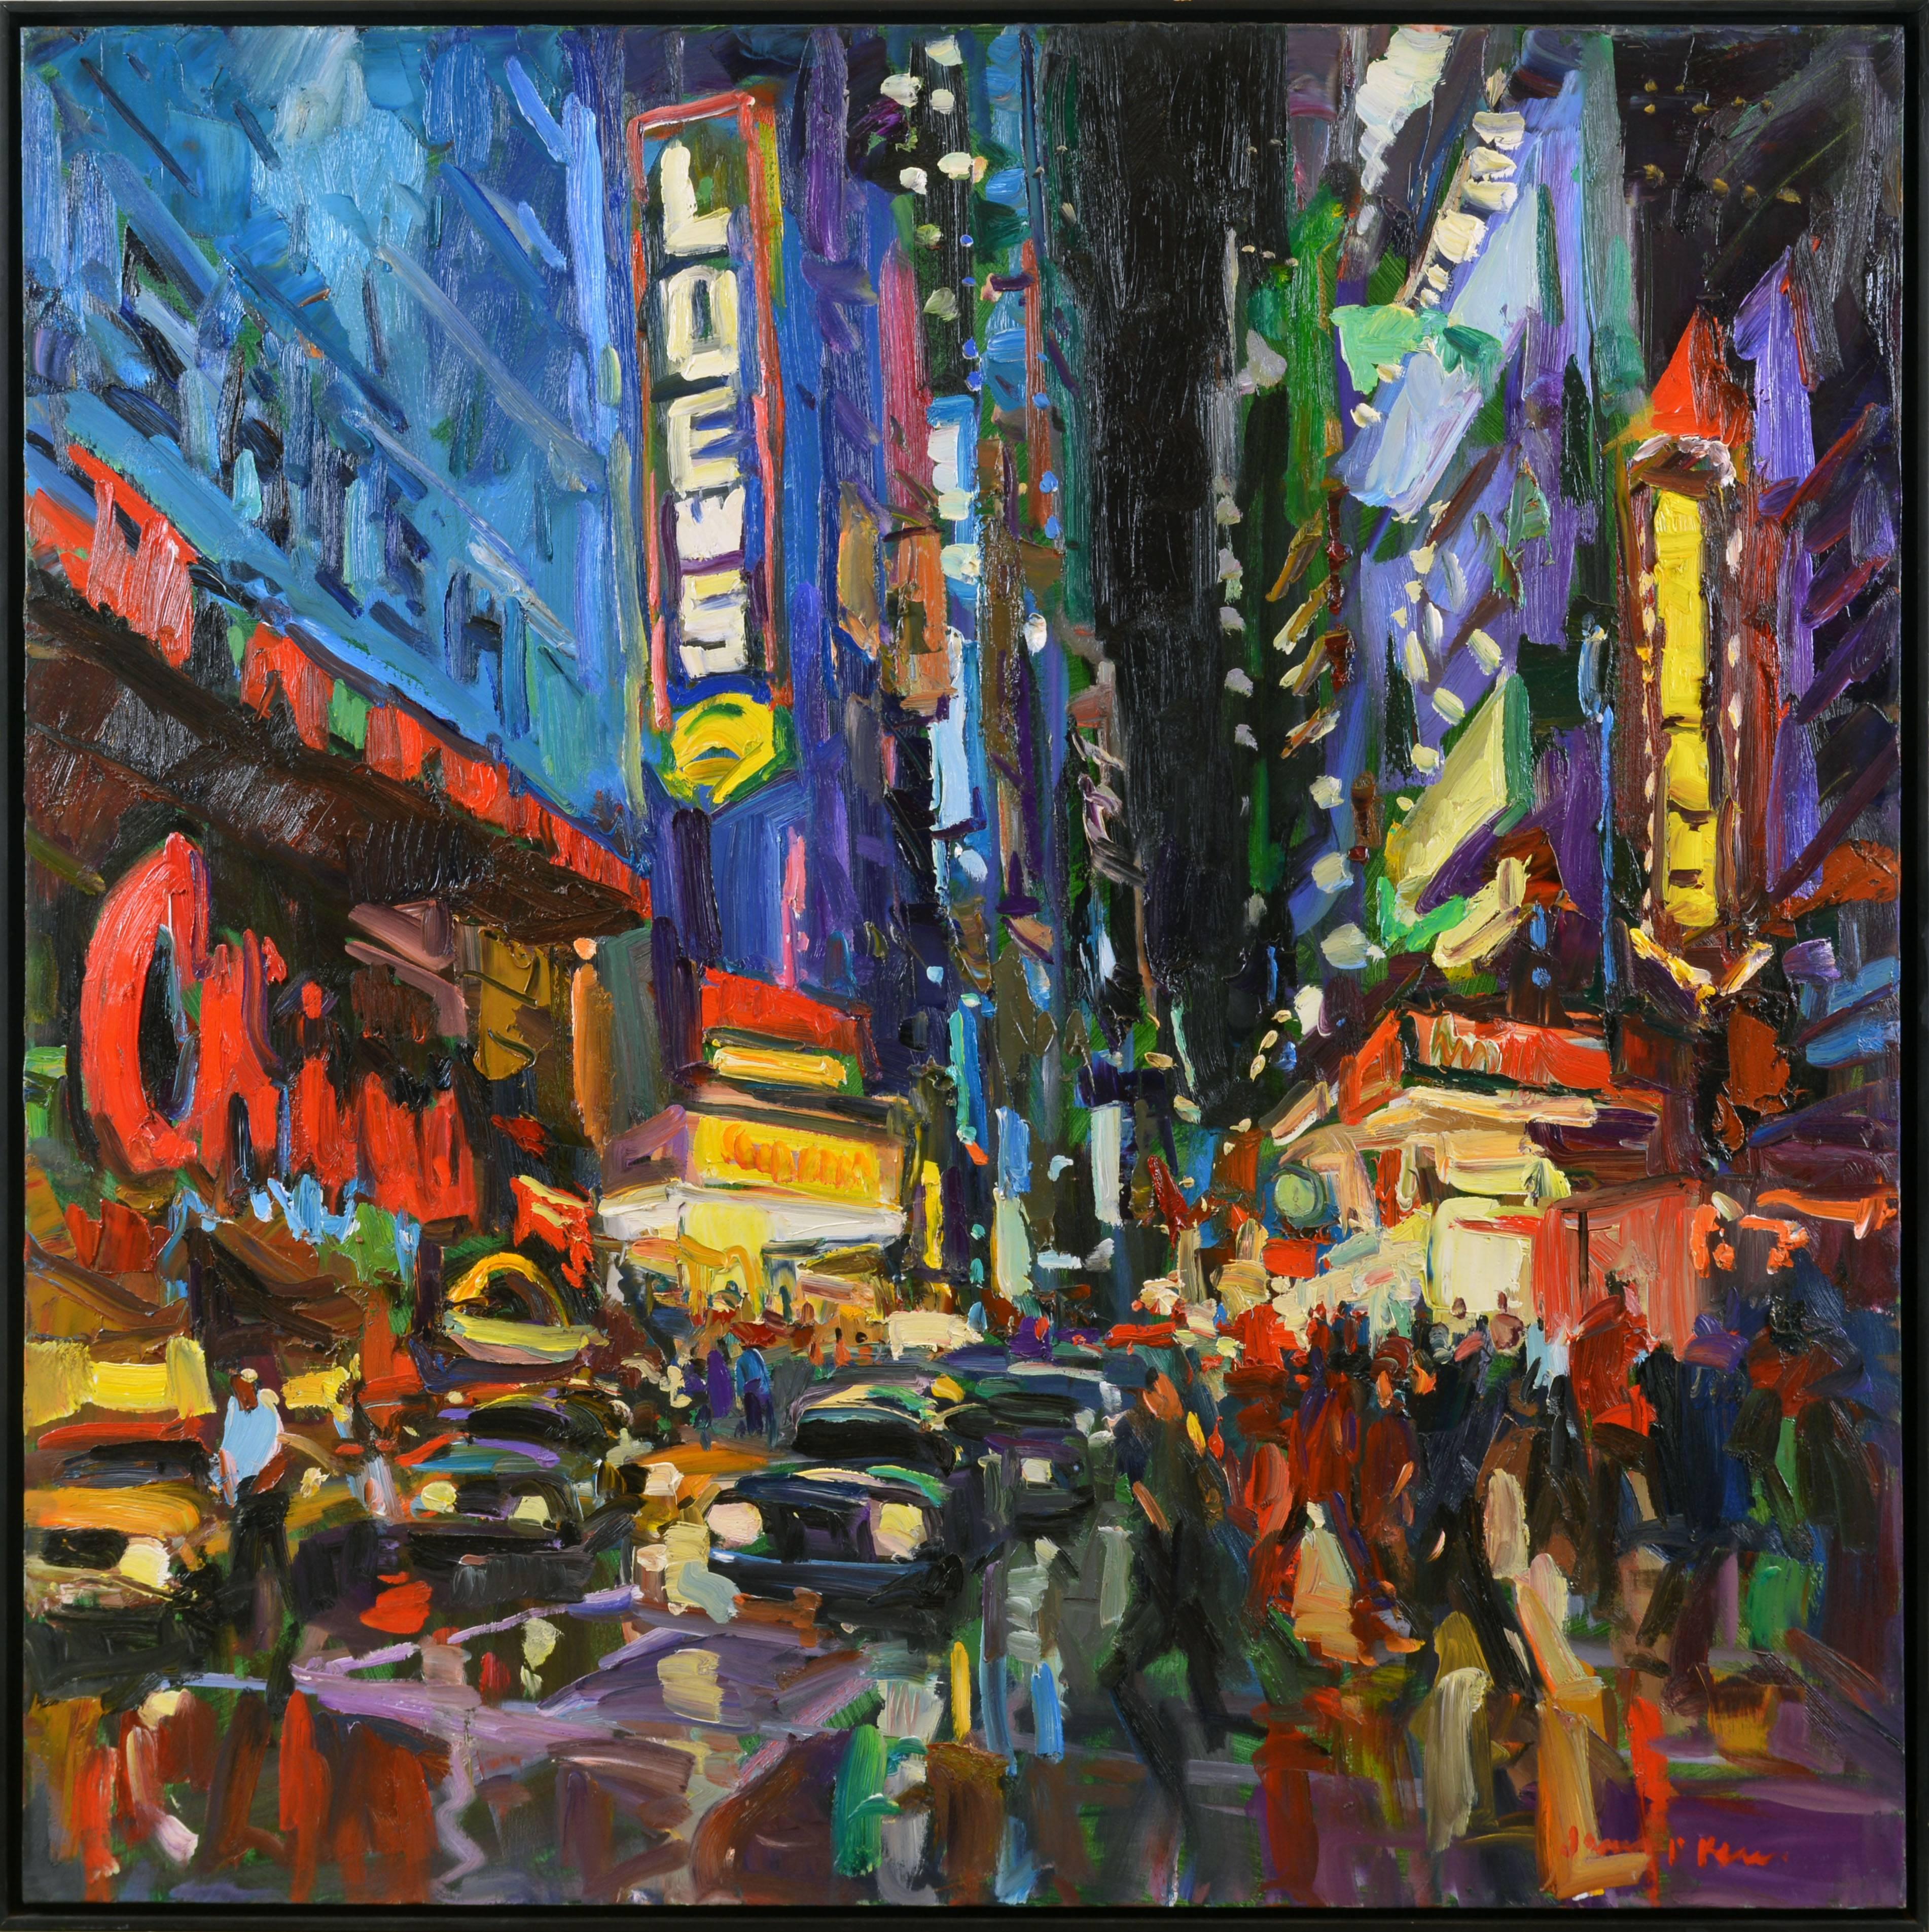 Opening night on broadway in New York city. James Kerr captures the flickering light, the rain, the people and their expectations with bold brush strokes and intense colour in this large oil on canvas measuring 48 x 48 inch. Without frame and 50 x